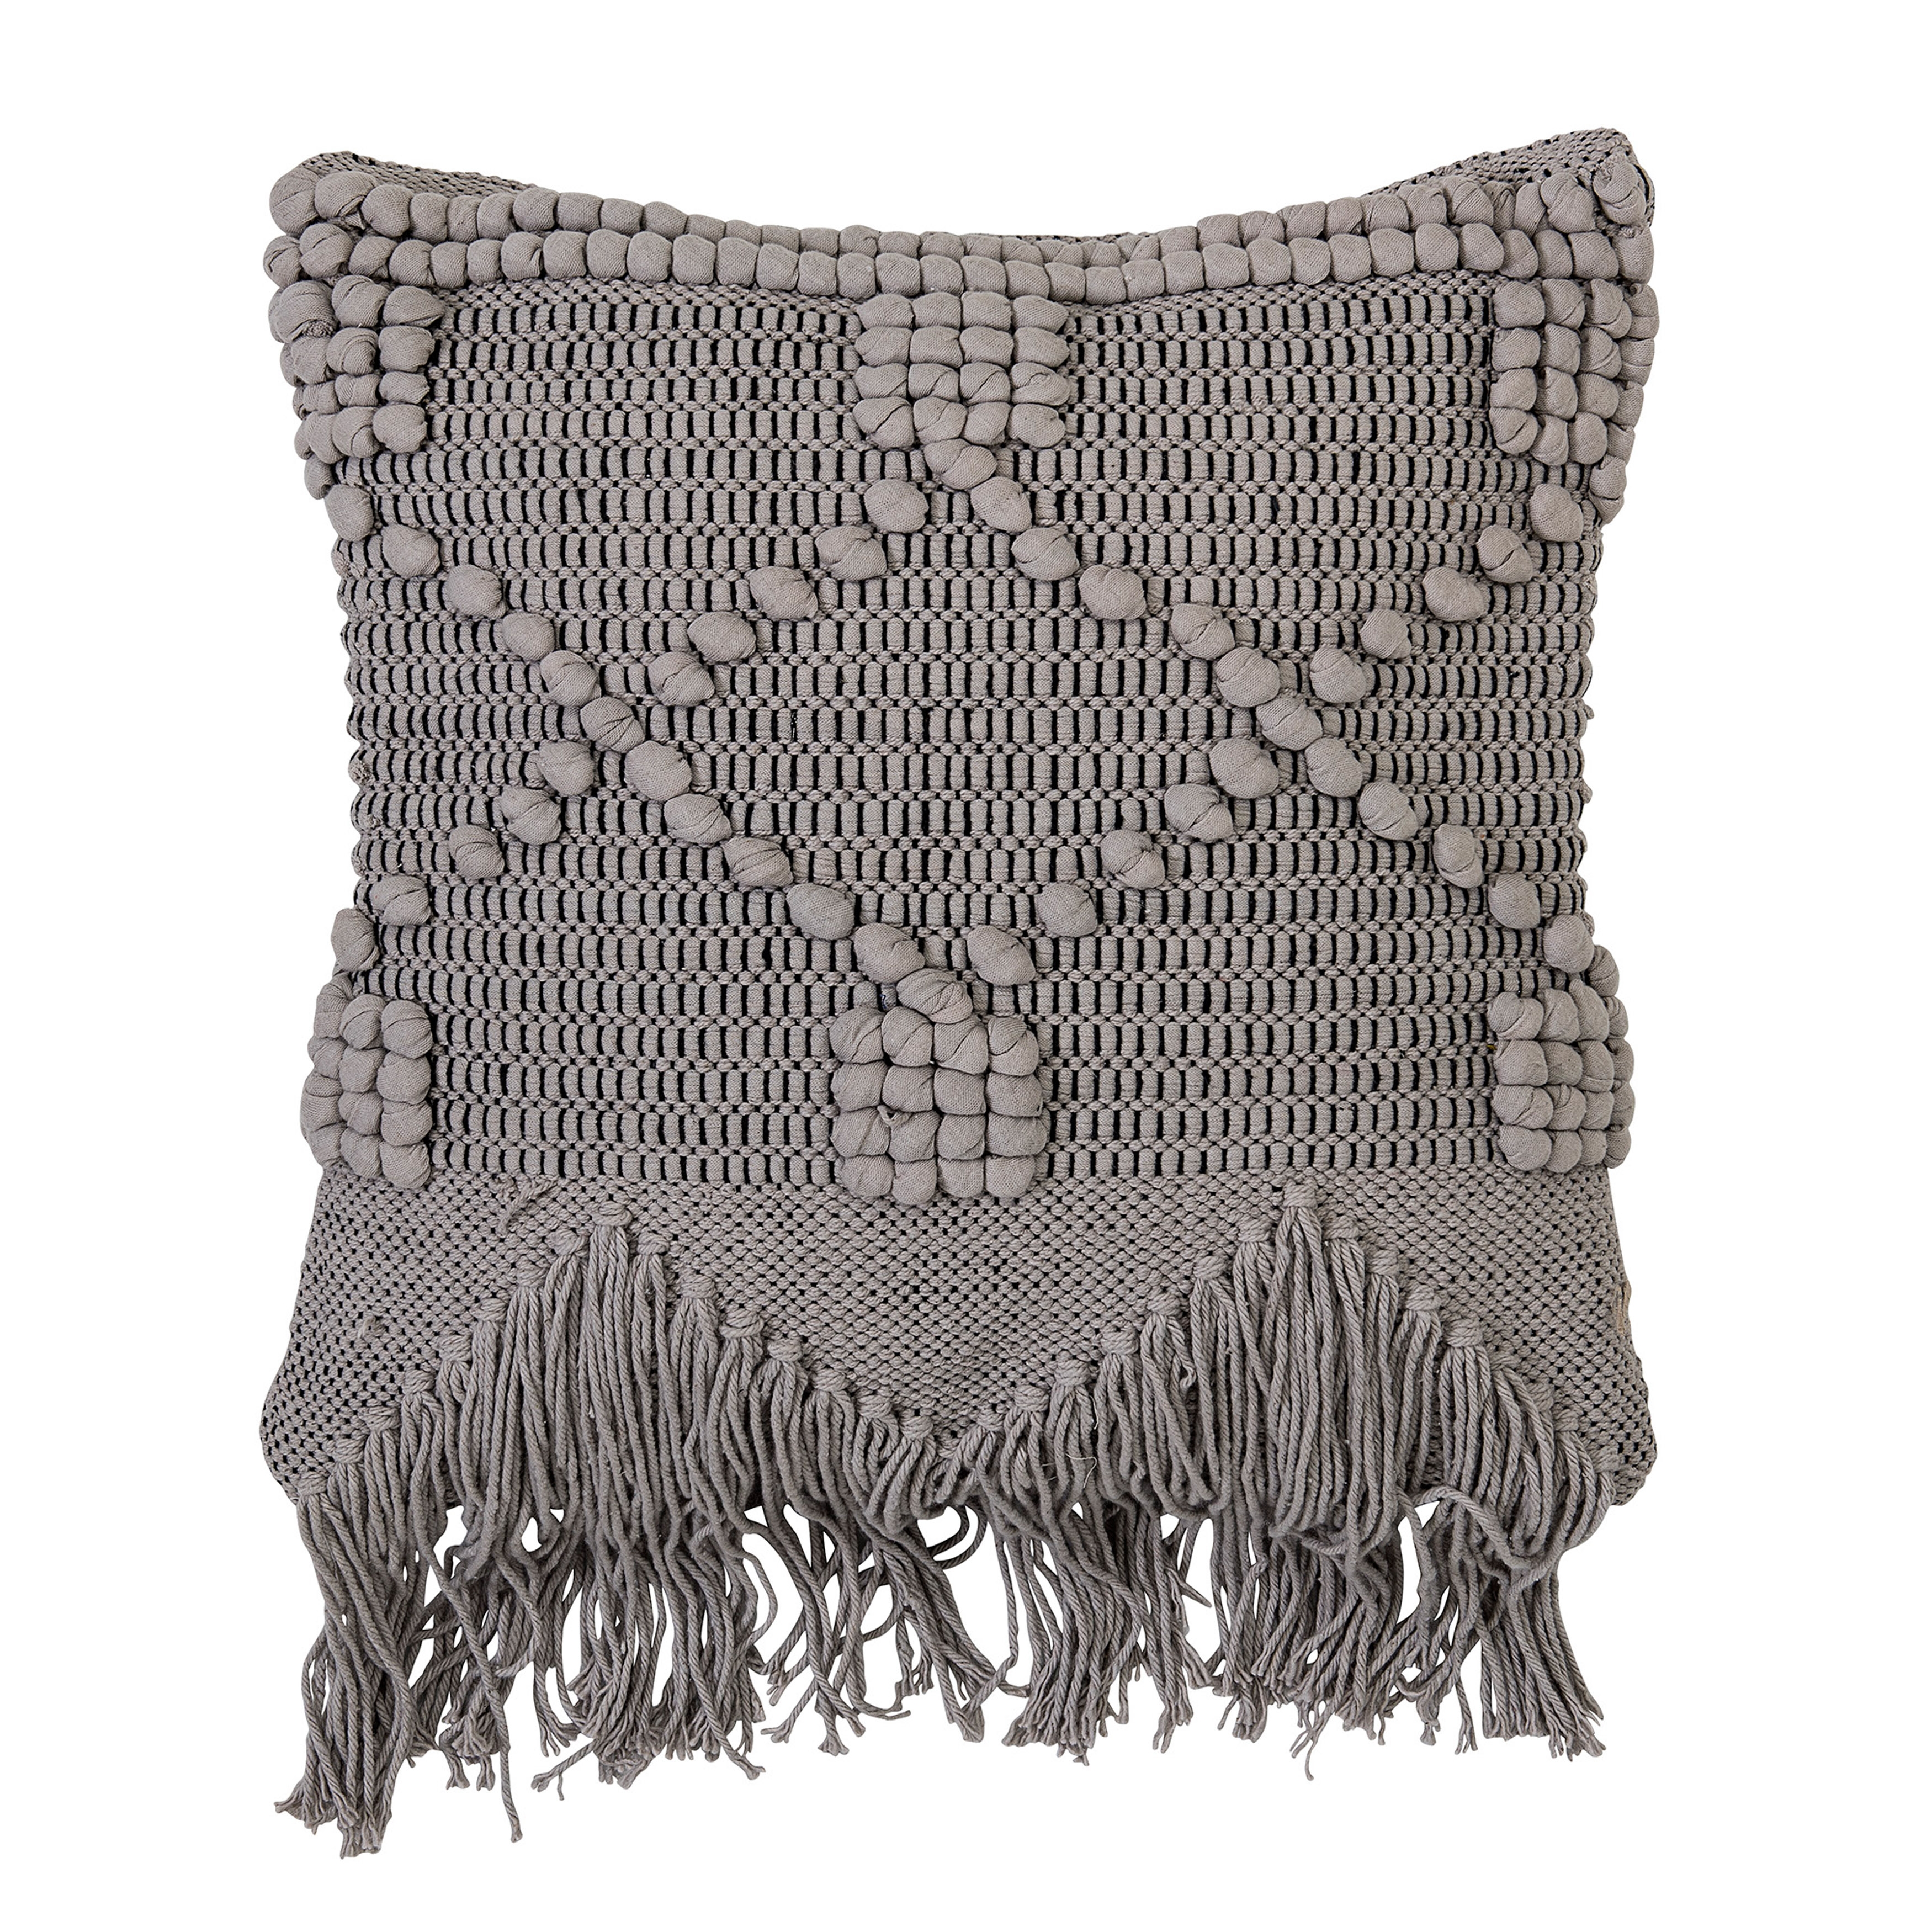 Textured Pillow with Fringe, Gray Cotton, 18" x 18" - Image 0